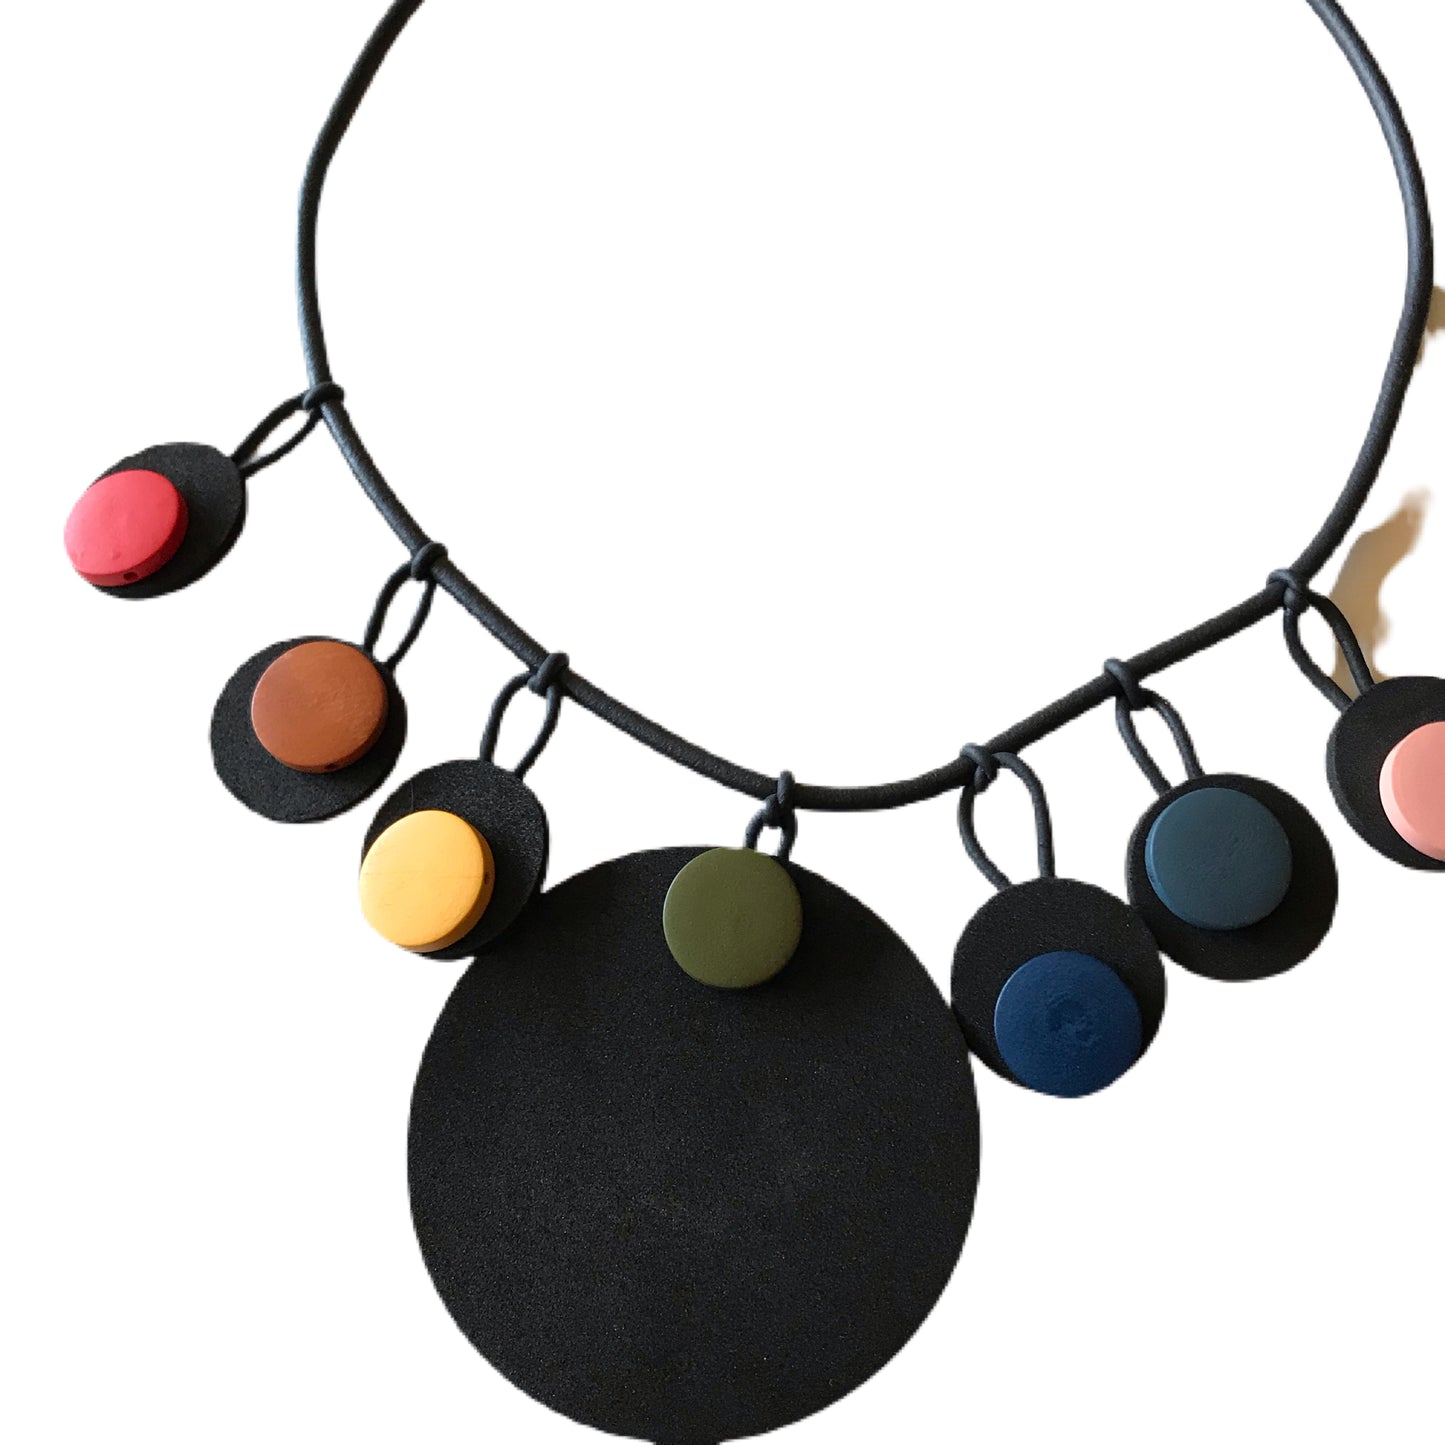 Op-Art Collection Foam Statement Necklace with Colored Discs